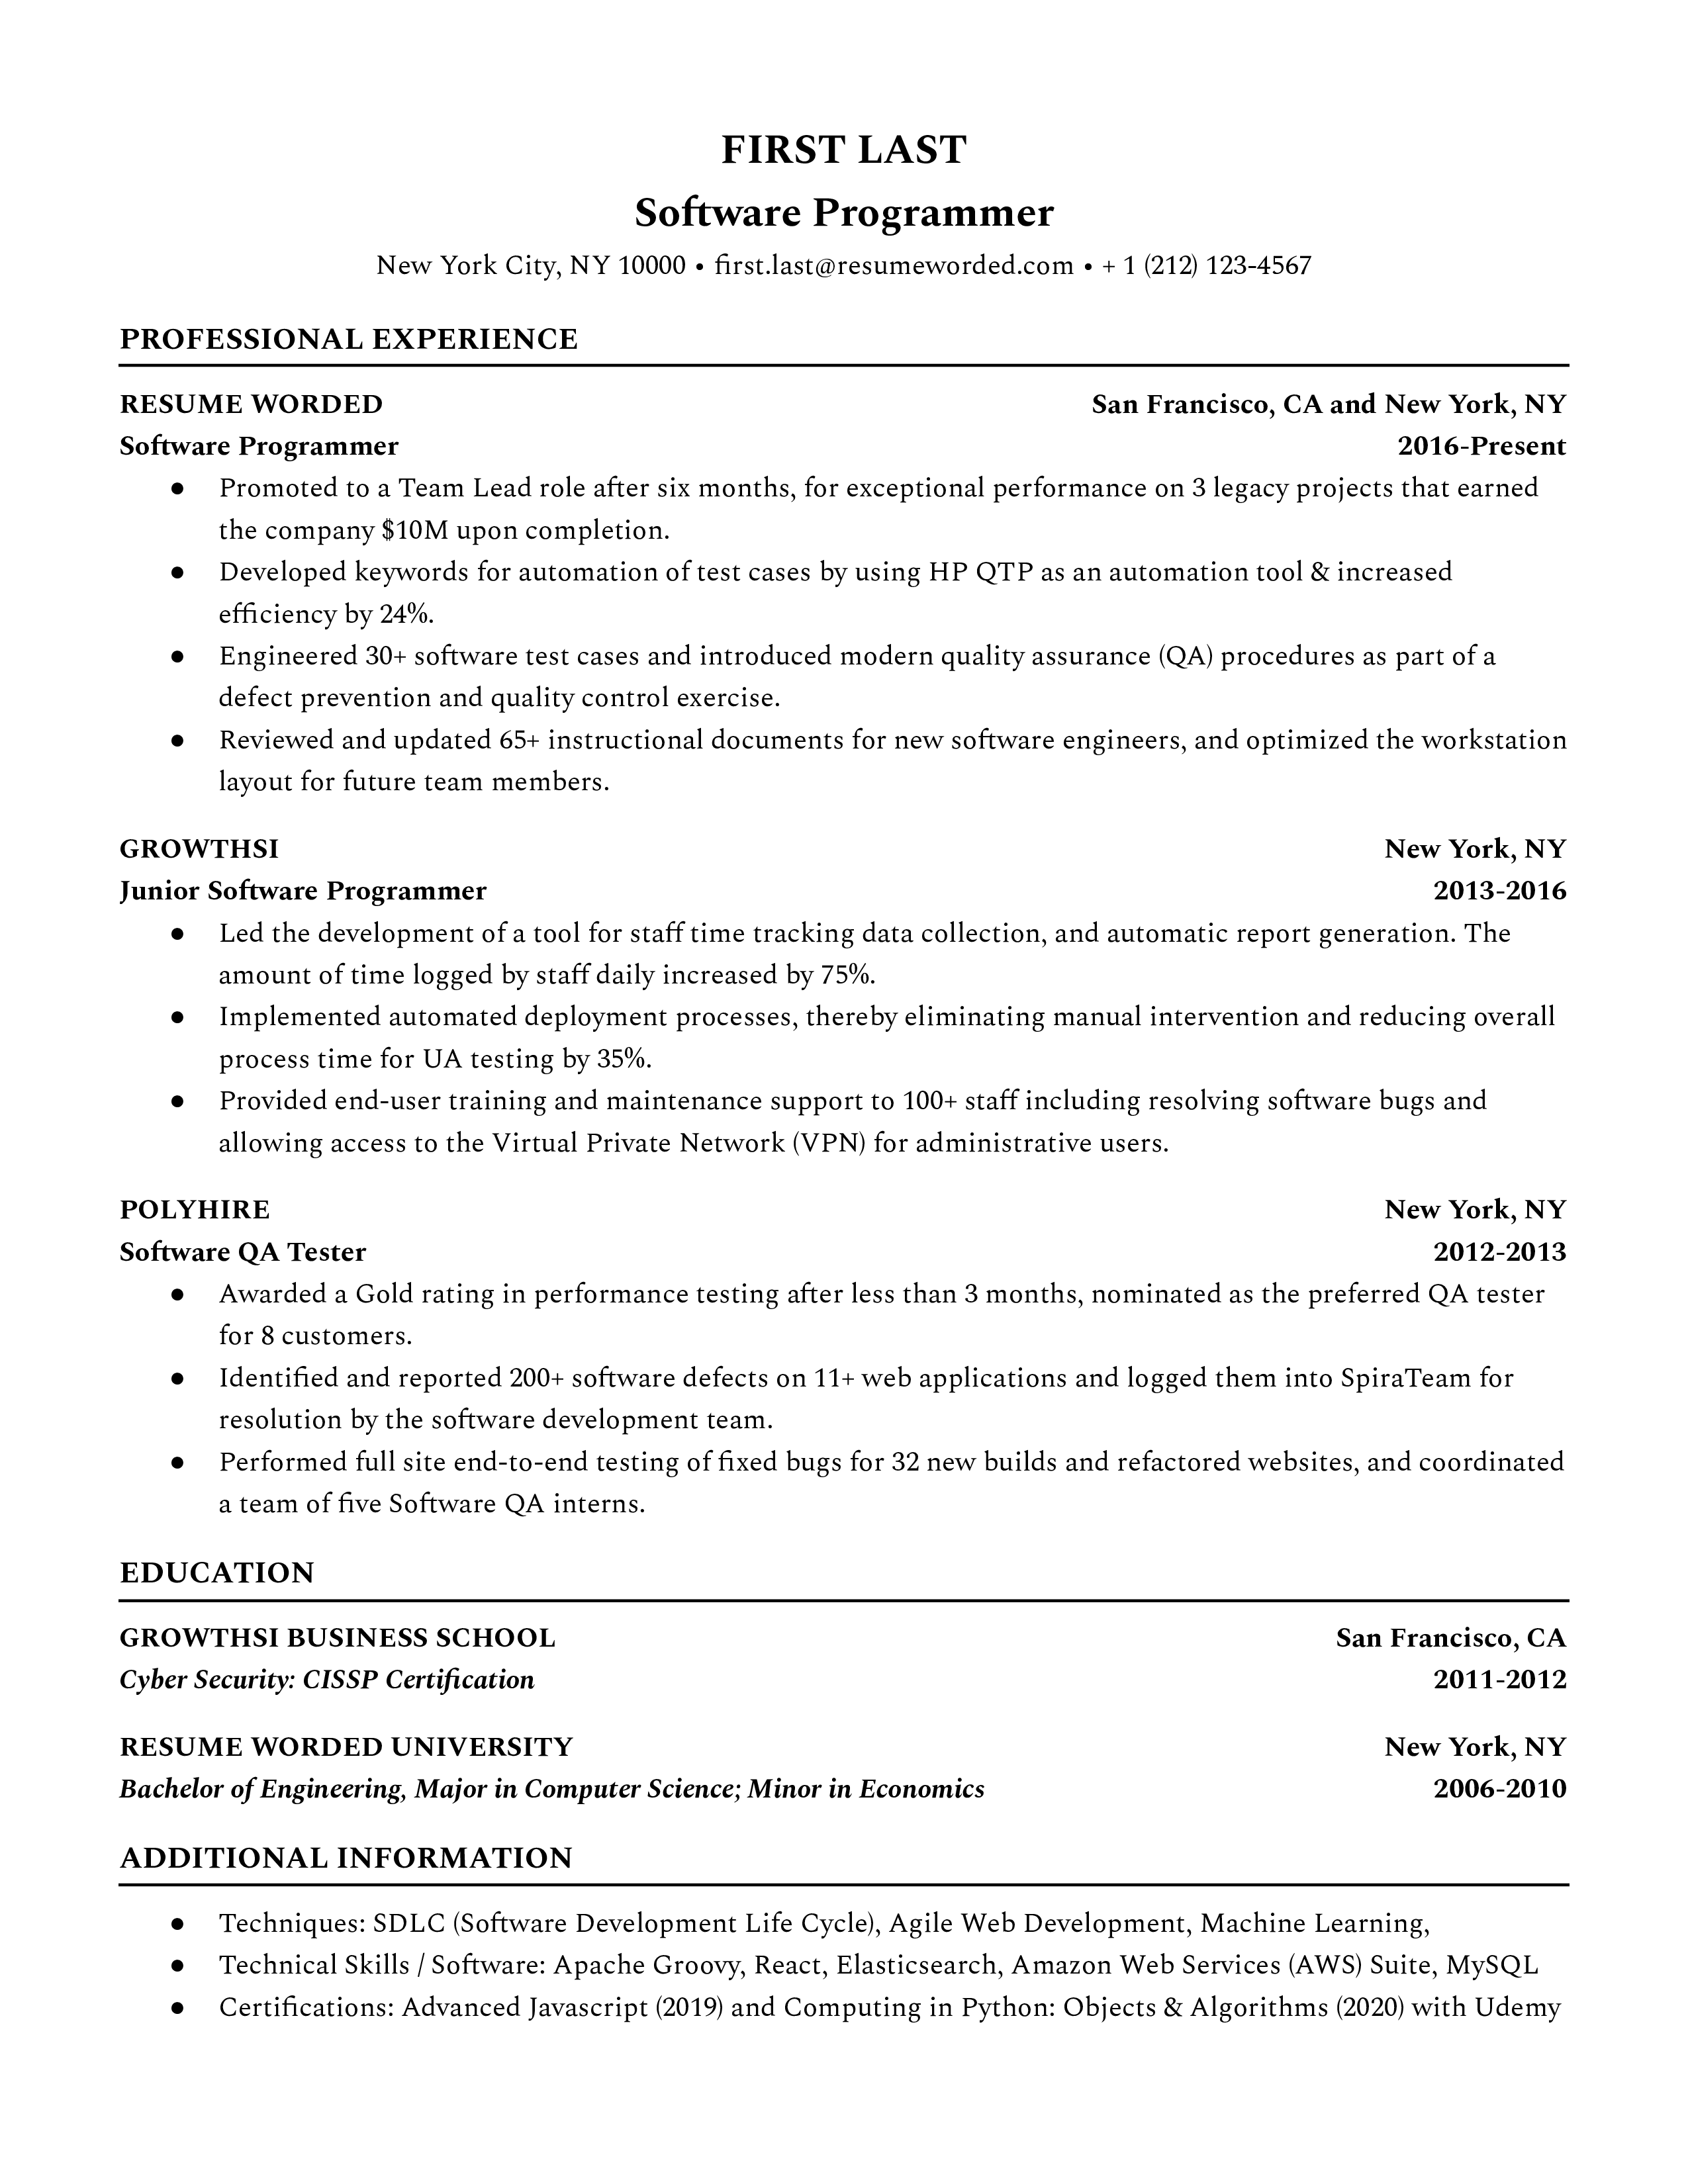 A software programmer resume that includes work experience, education, and additional information